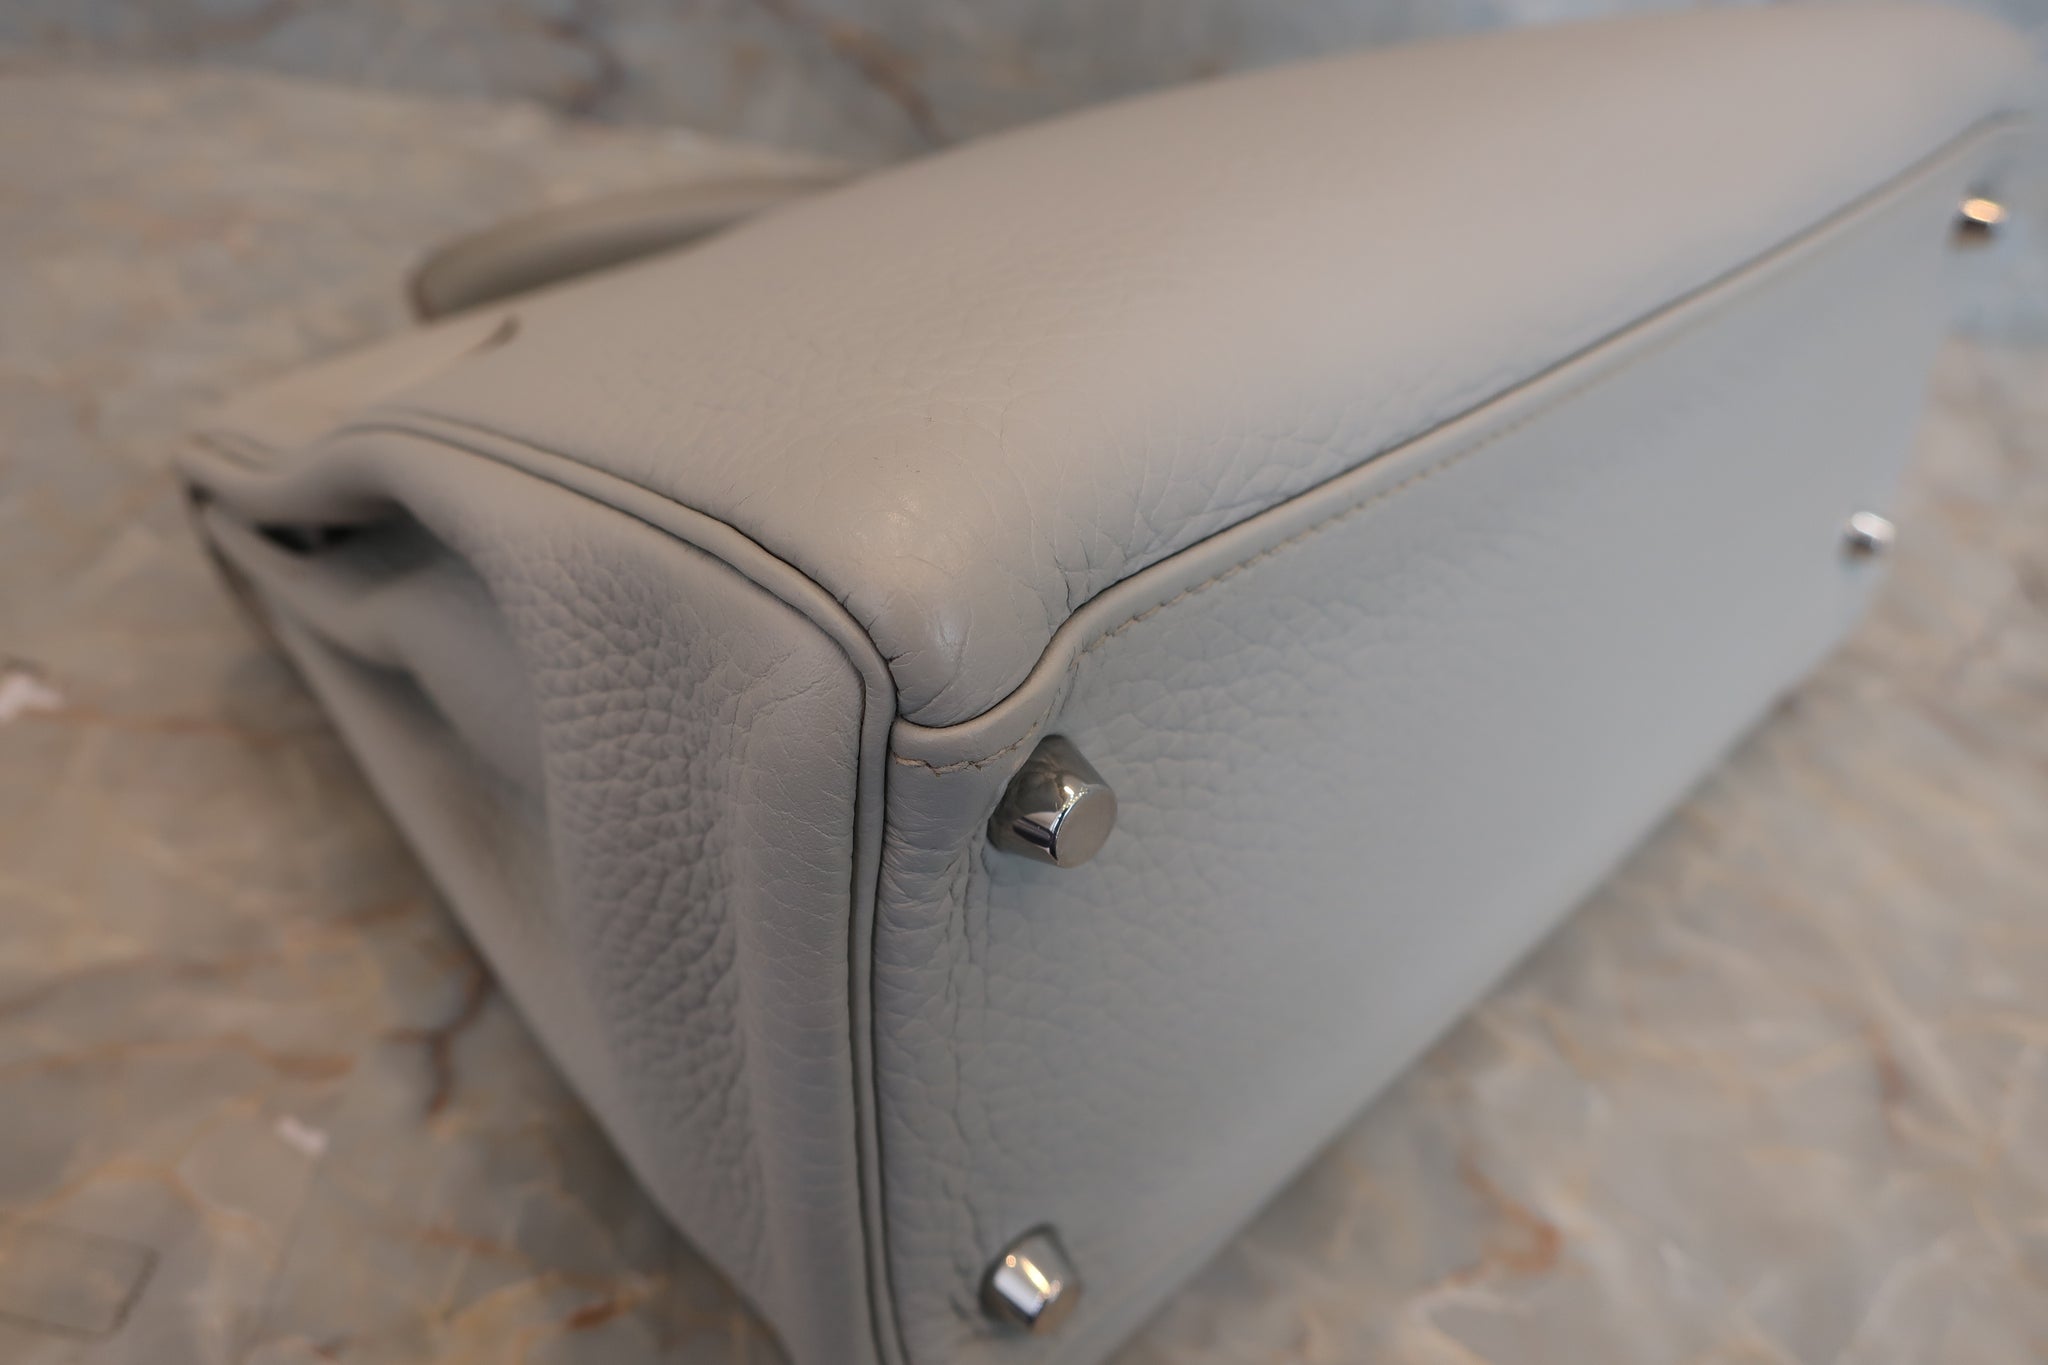 HERMES KELLY 28 Clemence leather Gris perle（Pearl gray） □O